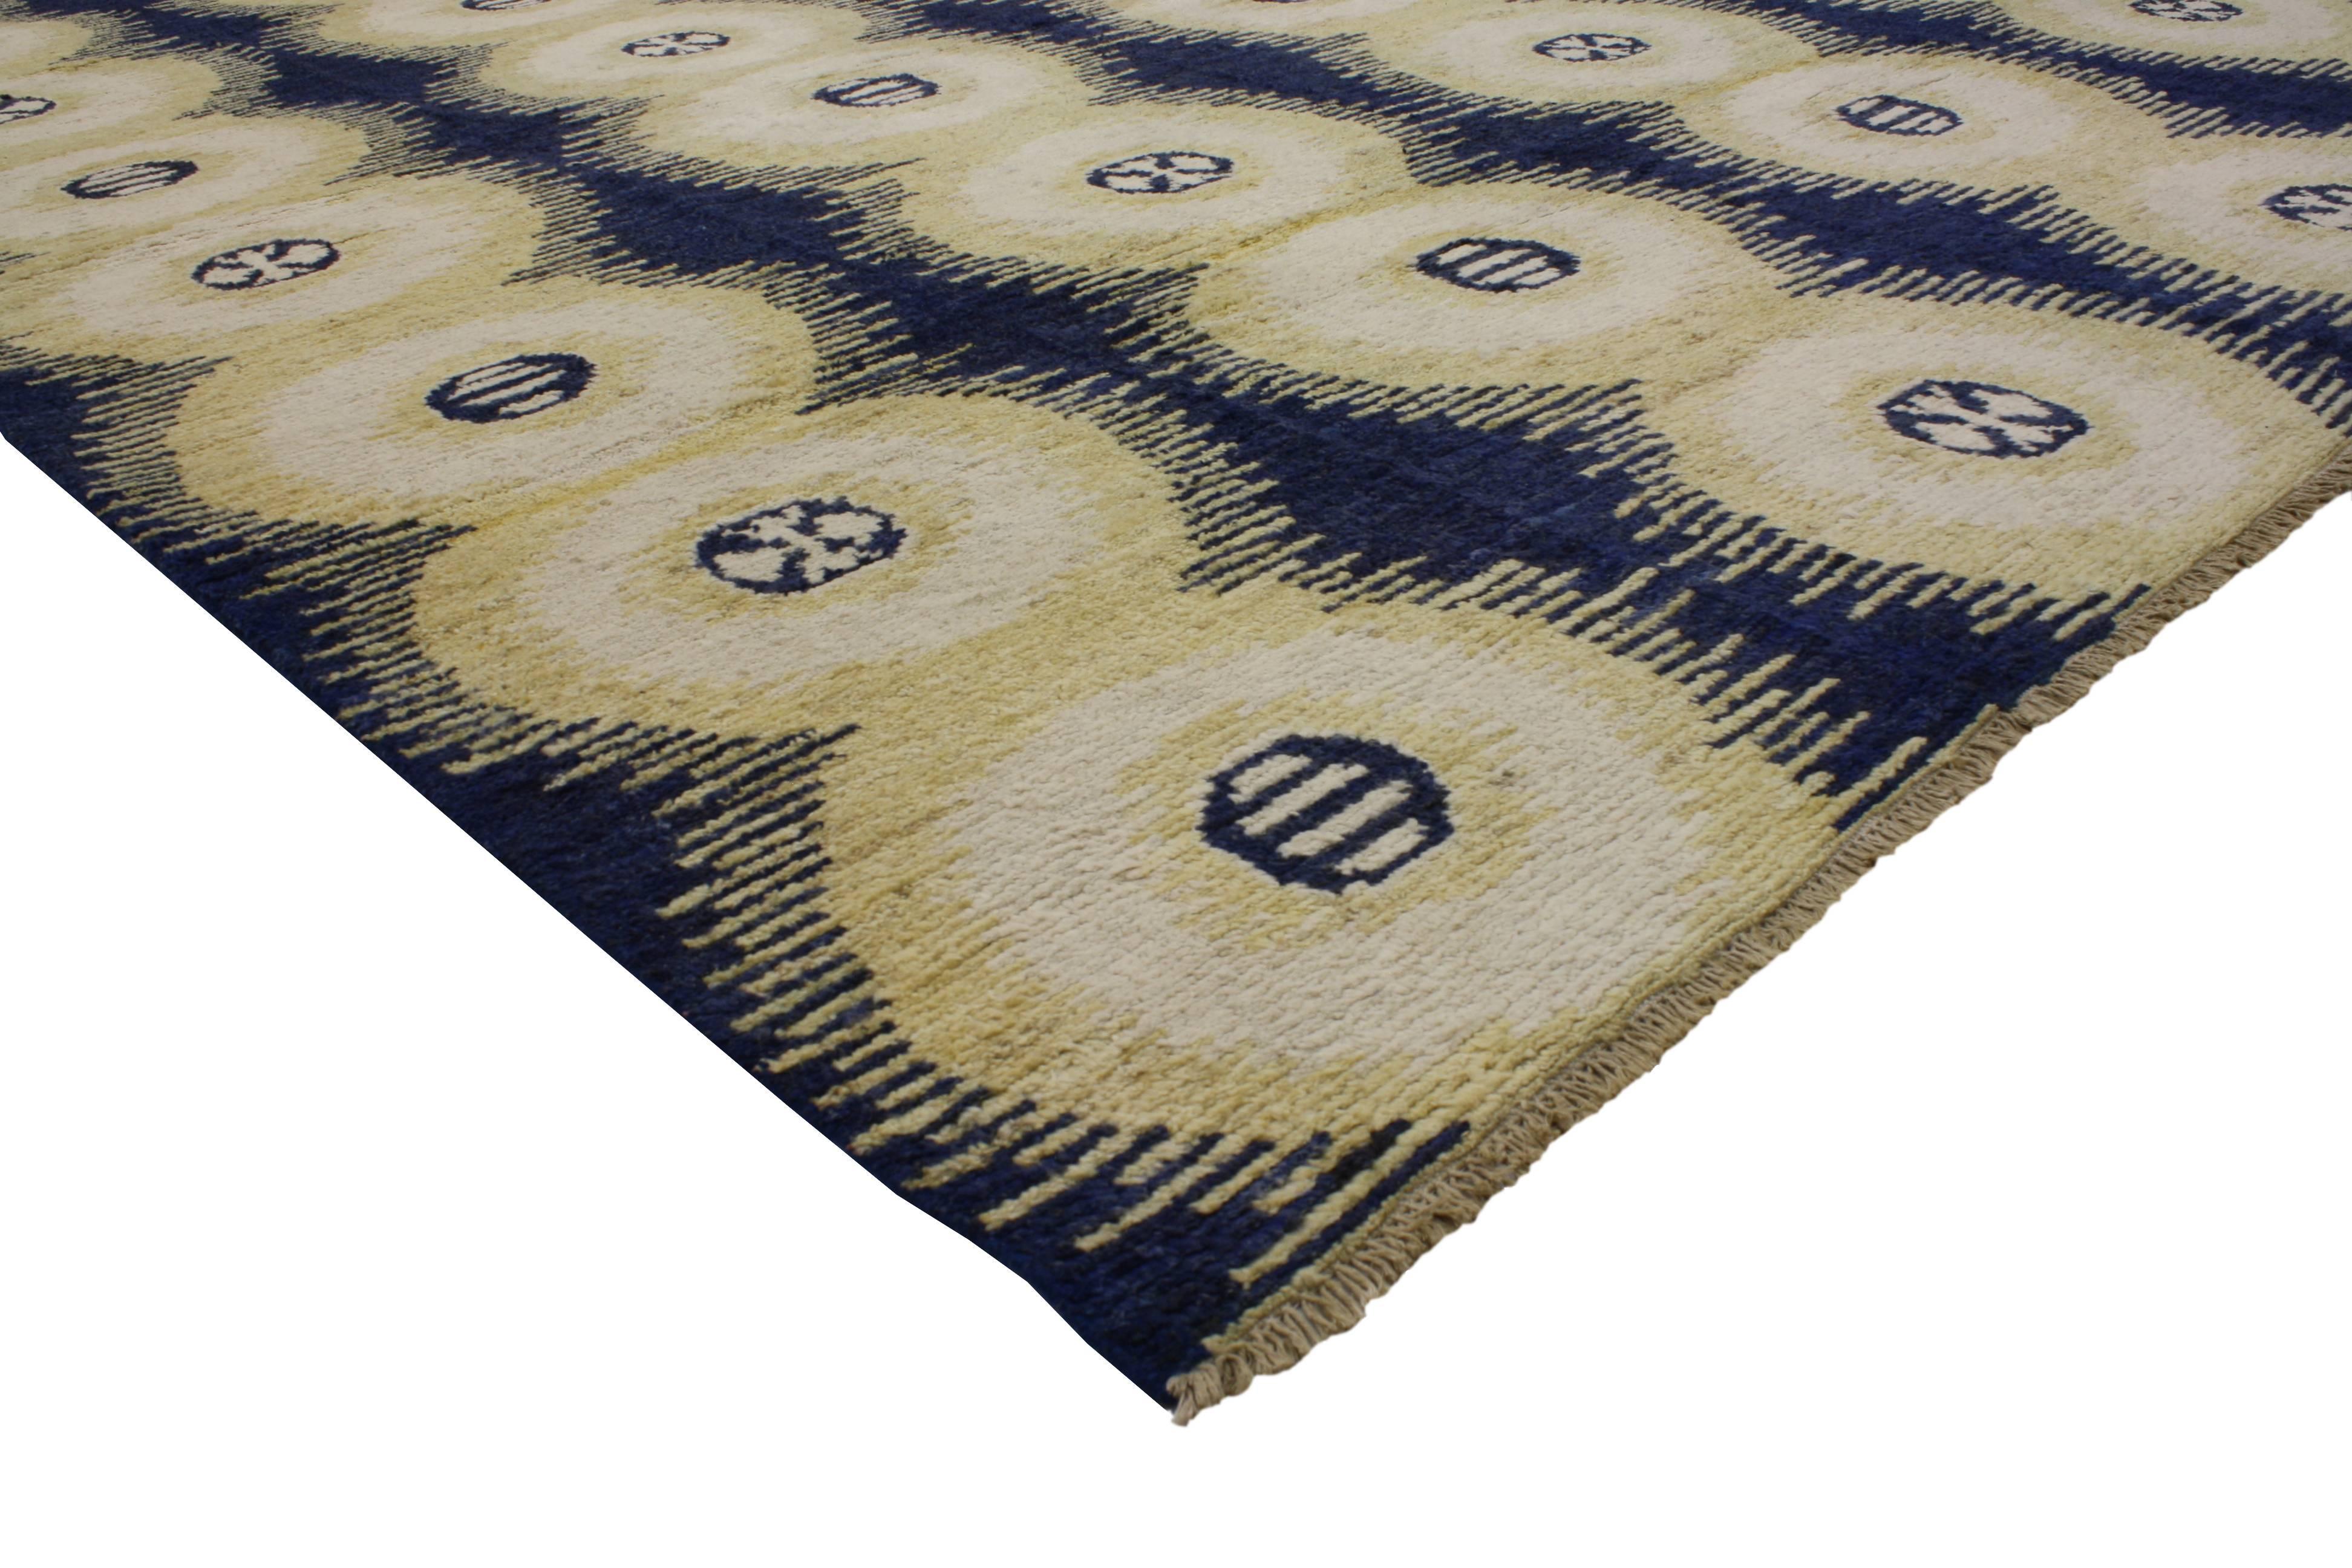 80340 New Contemporary Moroccan Style Area Rug with Symmetrical Circles and Modern Style, 10'04 x 14'00 (10 x 14 Area Rug). The repetitive and symmetrical pattern in this Modern Moroccan style rug is obvious: circles aplenty creating unity, harmony